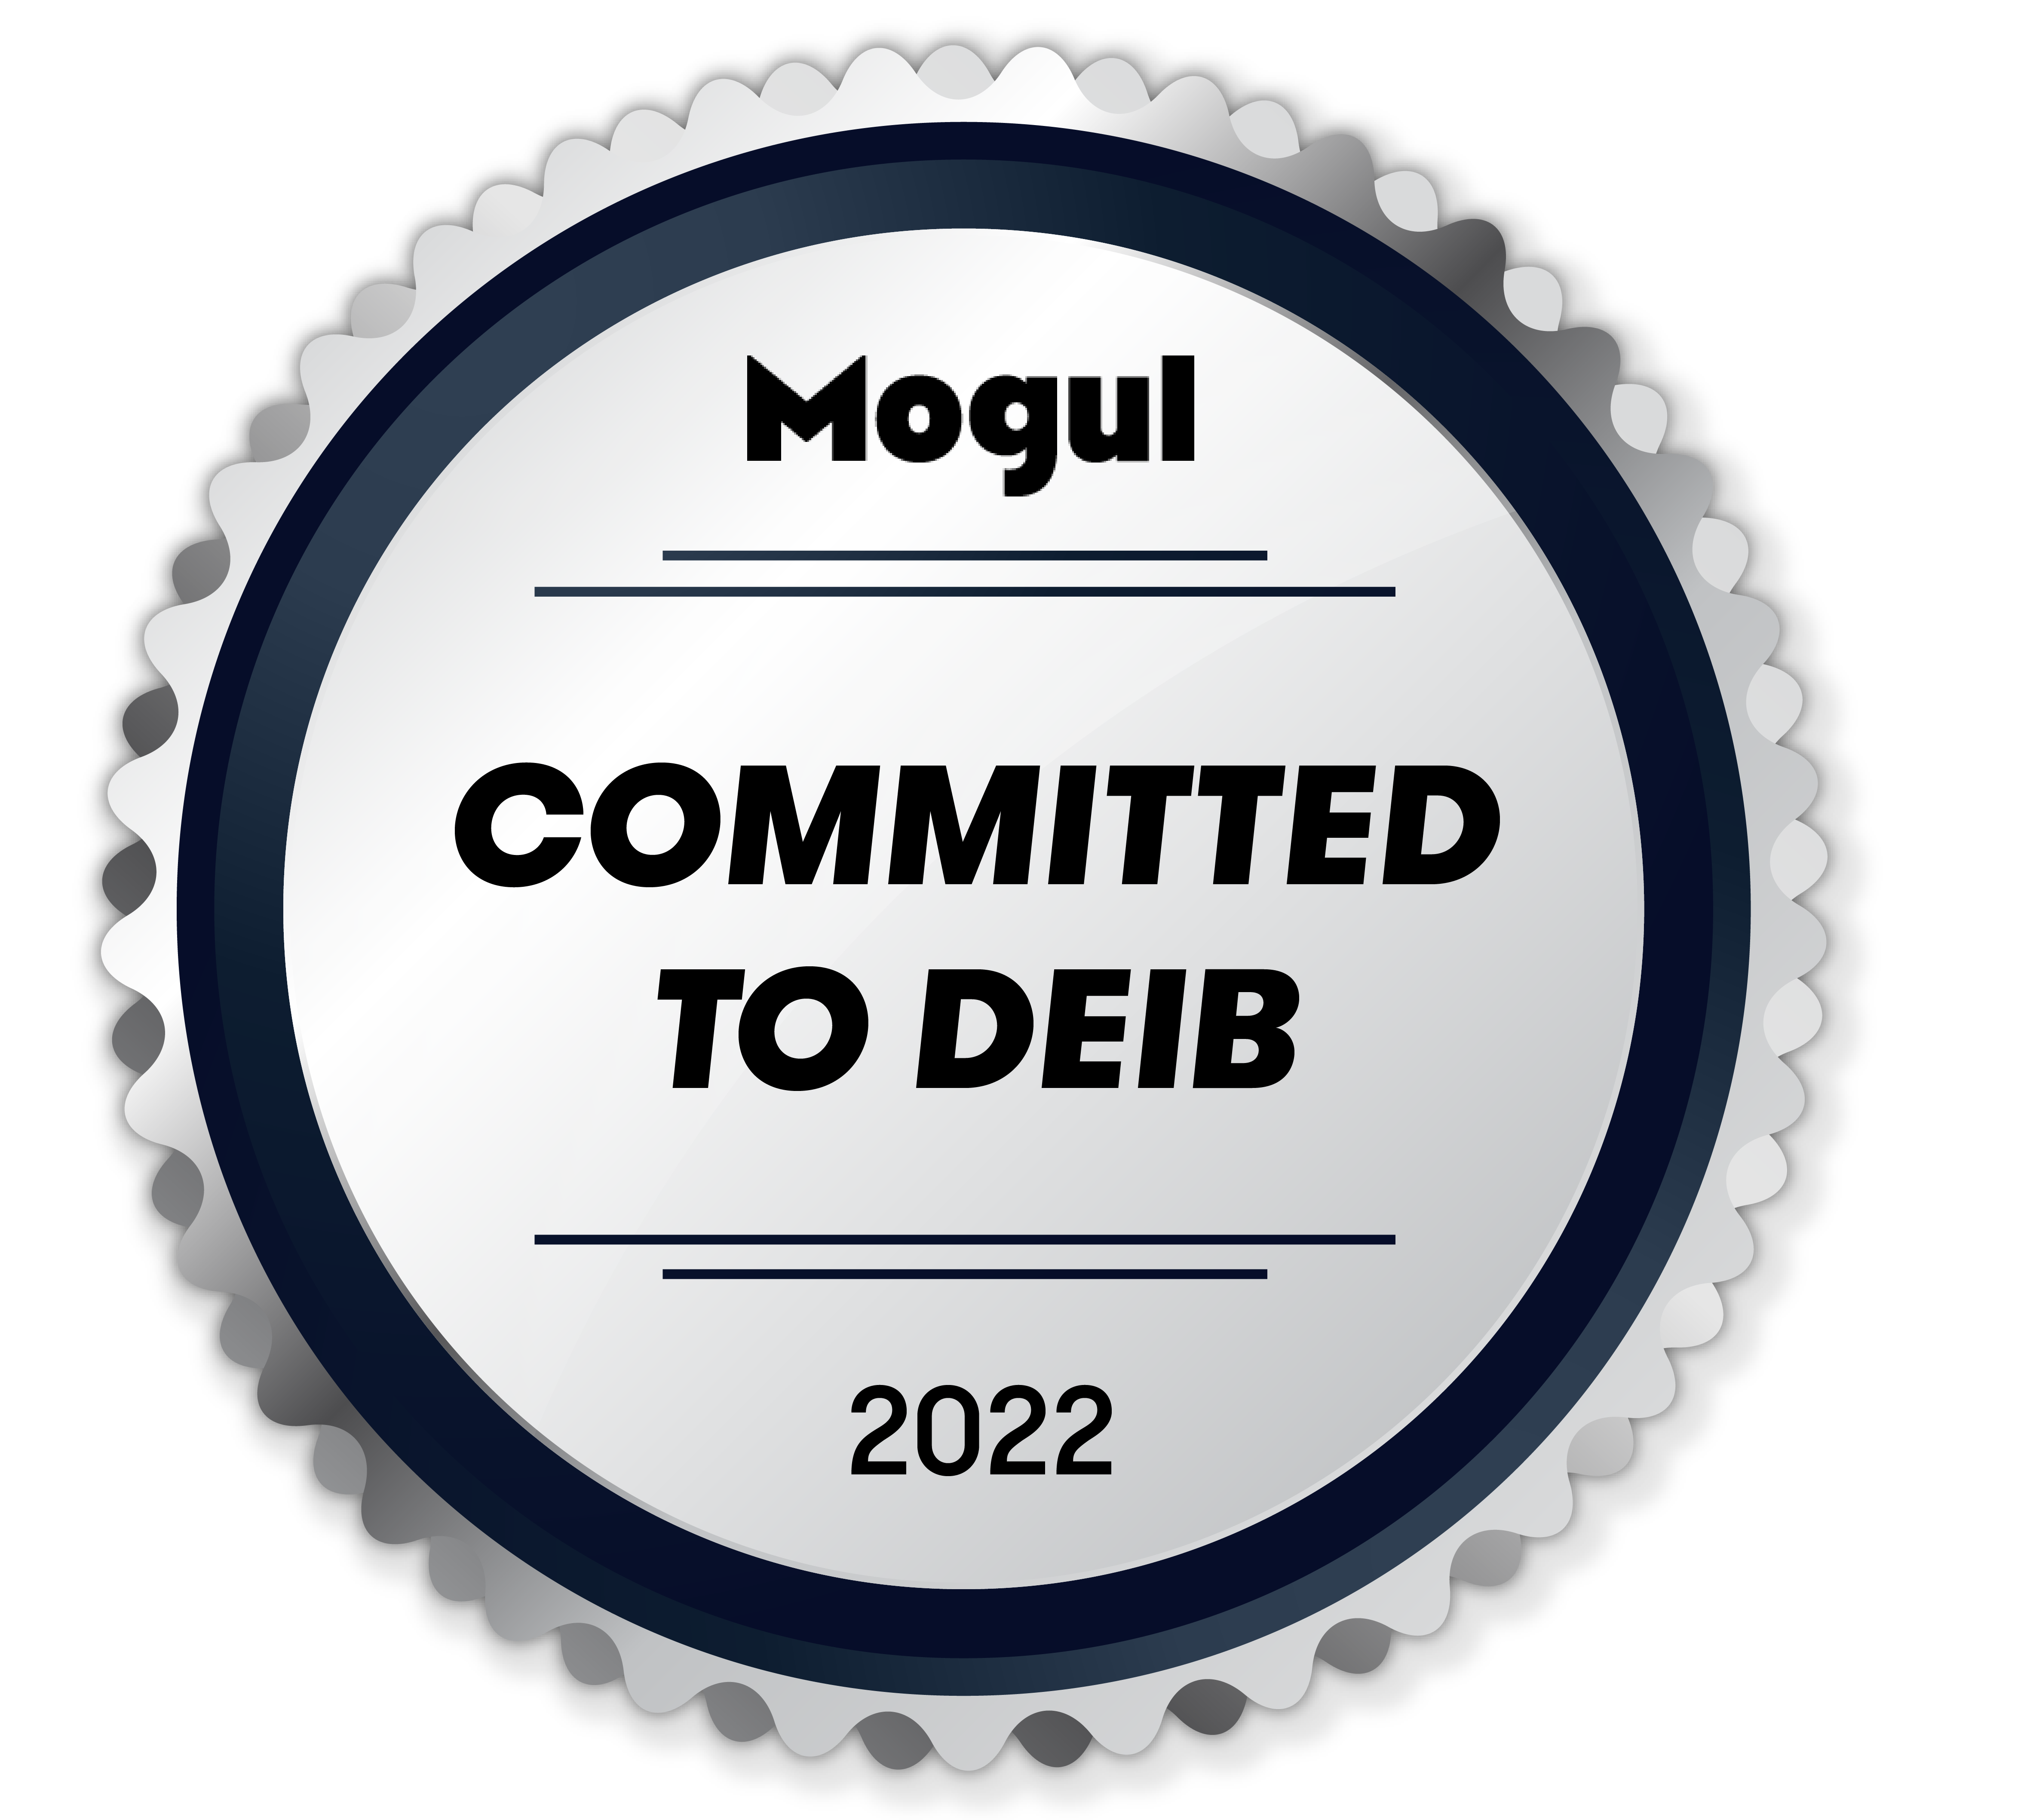 Mogul Committed to DEIB Badge